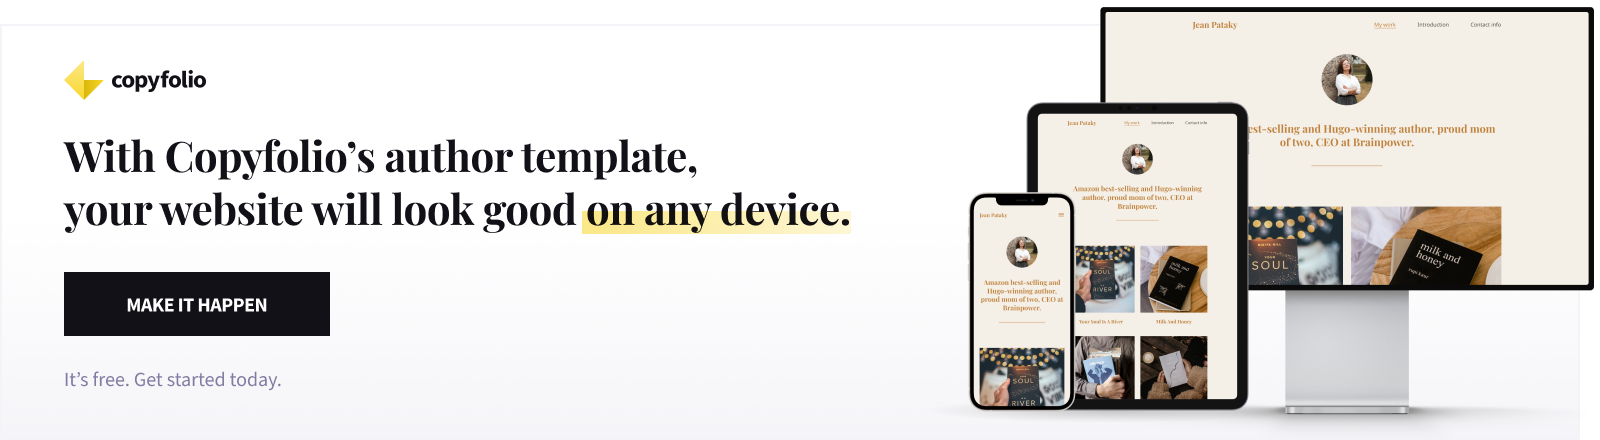 With Copyfolio's author website template, your website will look good on any device. Make it happen. Get started today.